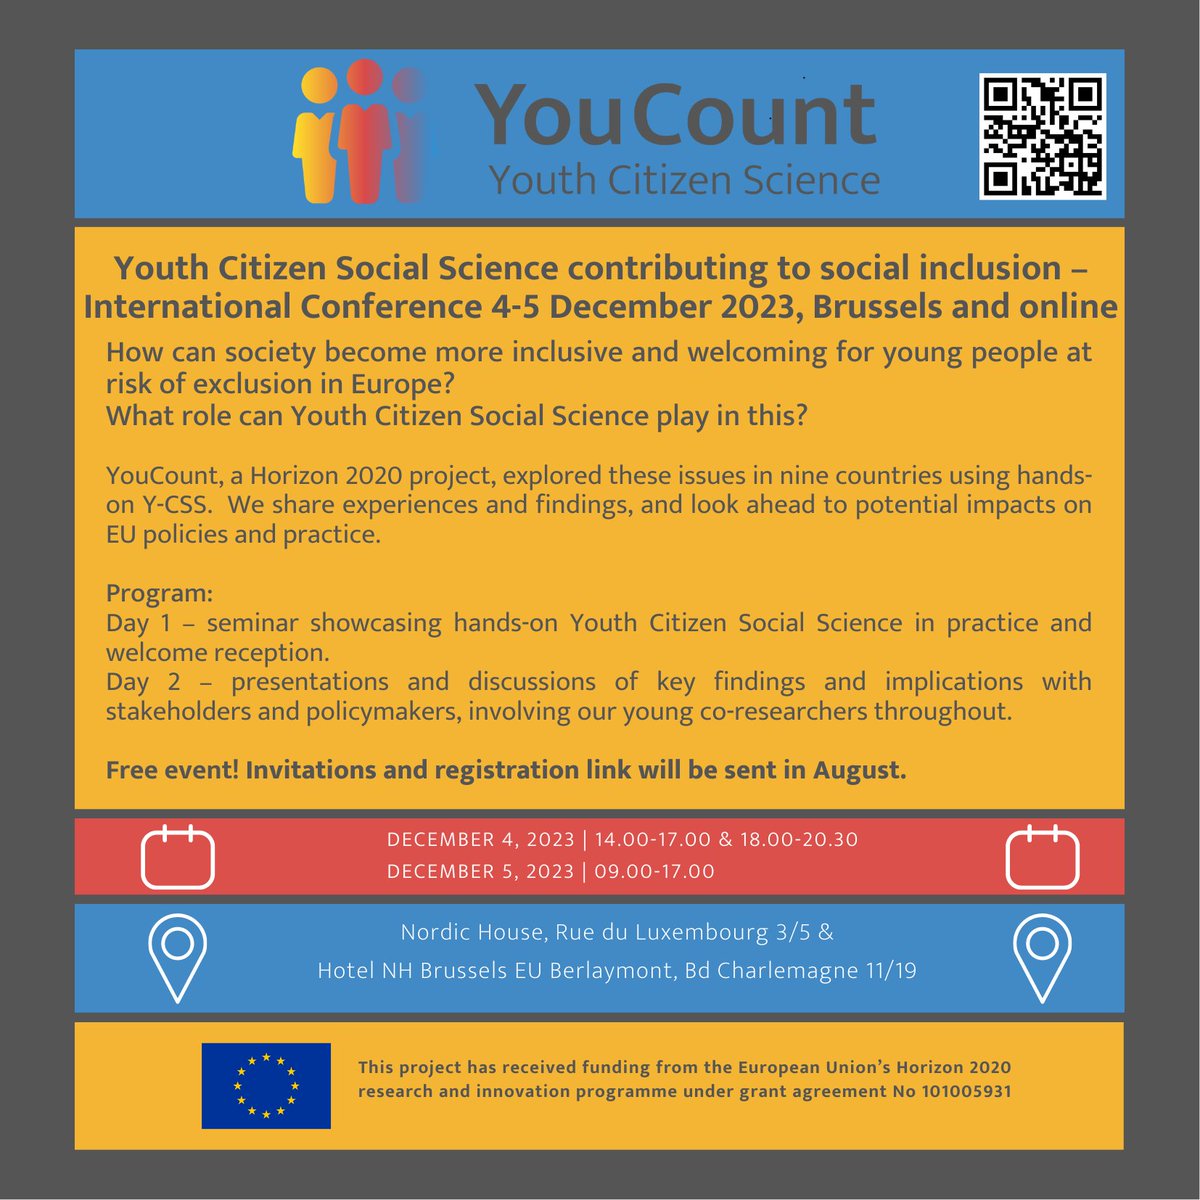 👩‍🔬 YouCount Conference 👨‍🔬

YouCount explores how society may become more welcoming for youth at risk of exclusion across the EU. 

Learn about Youth Citizen Social Science & discuss our findings with stakeholders, policymakers, & citizen scientists...for free & partially hybrid!